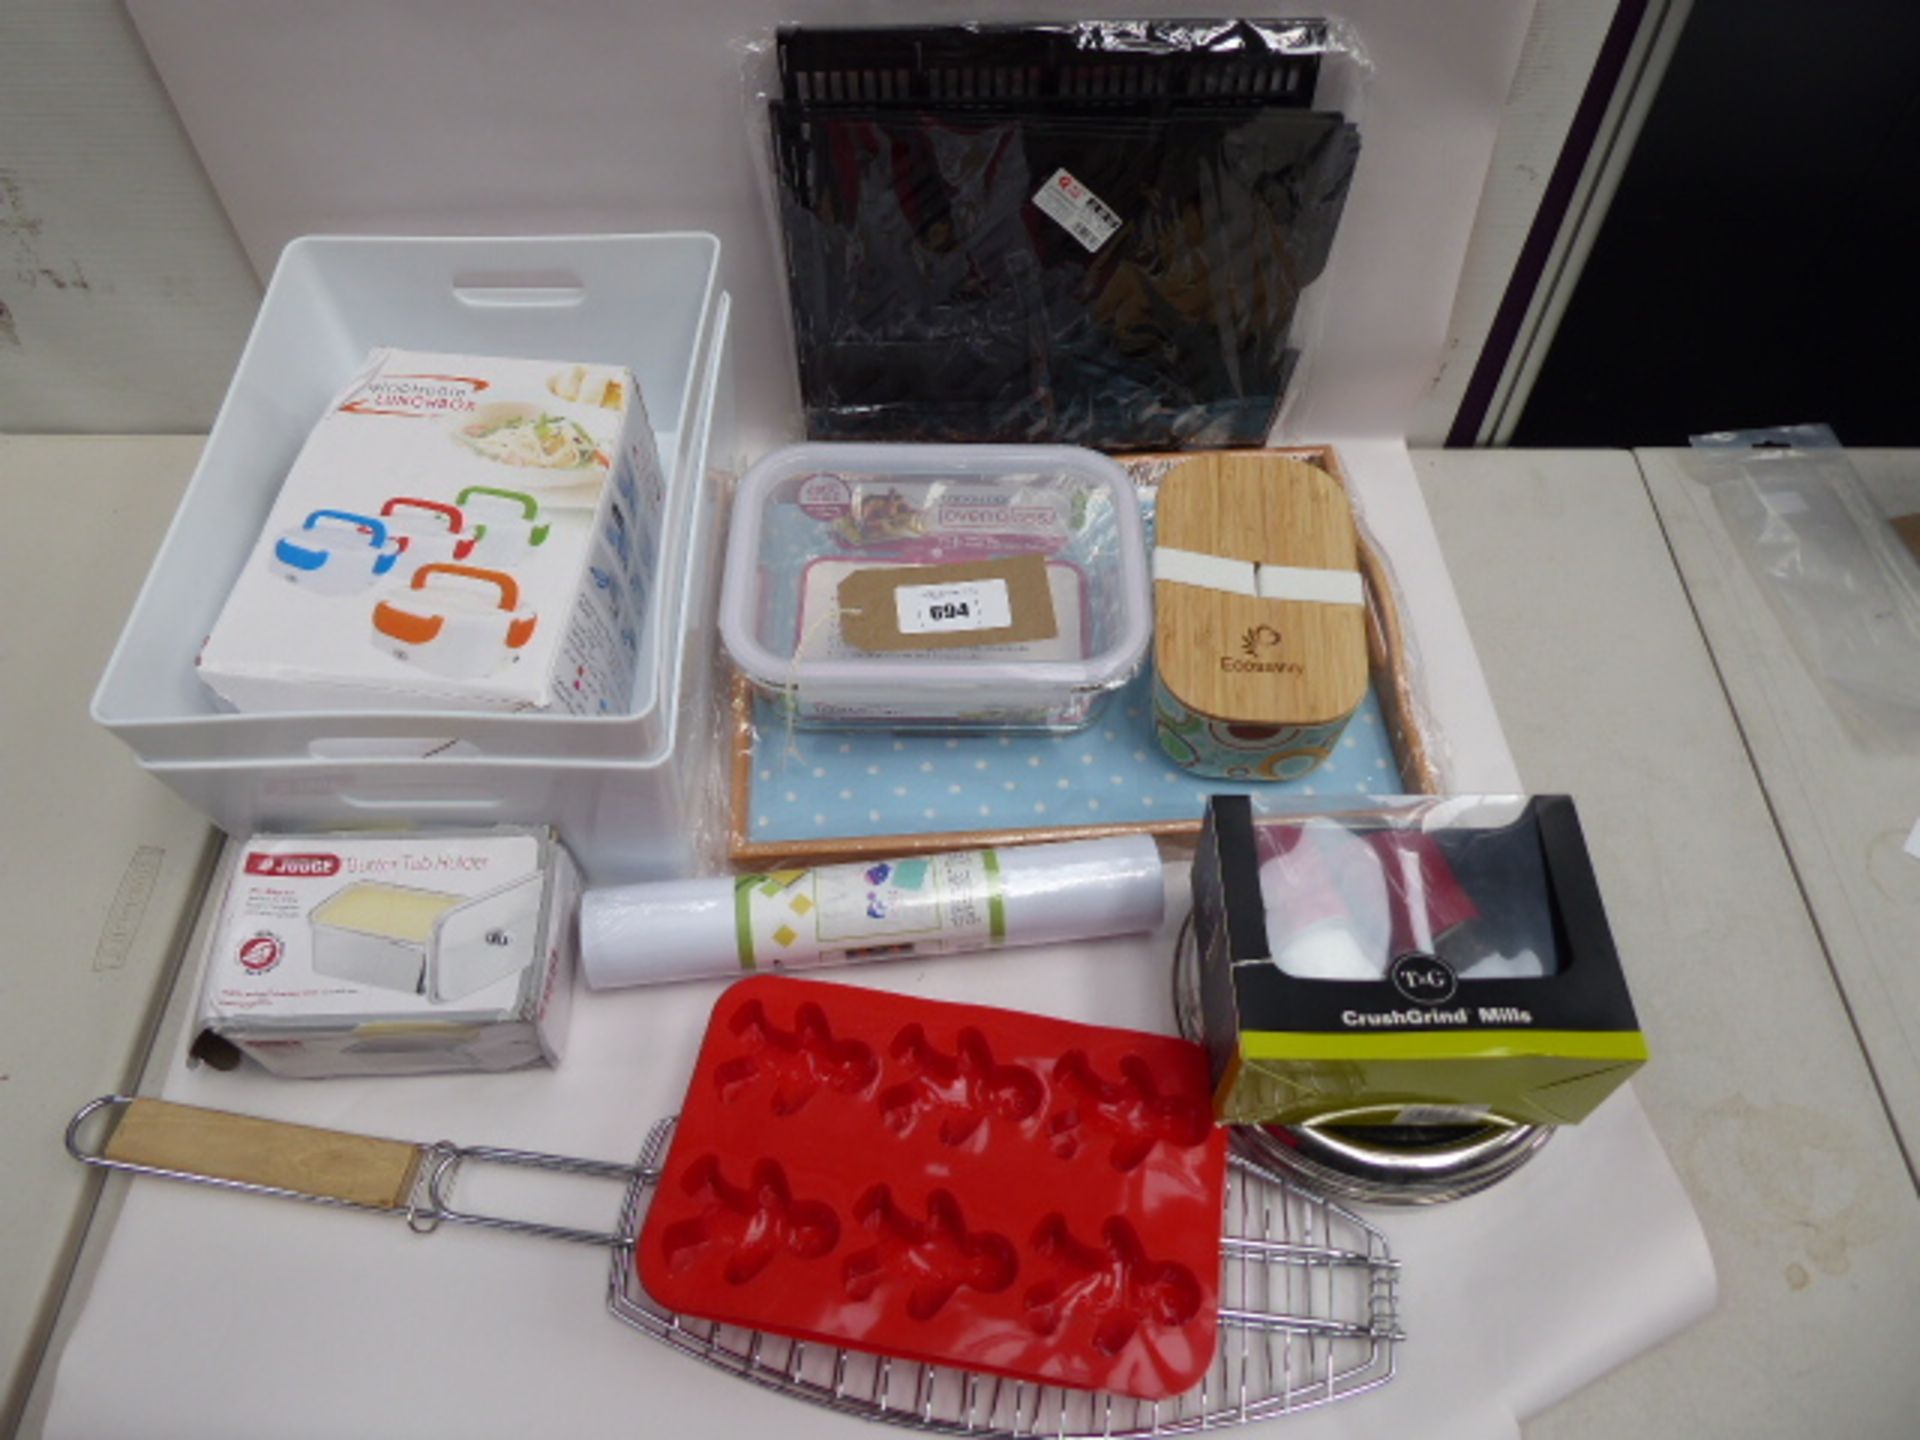 Consignment of kitchenlia; storage boxes, salt and pepper grinders, tray, jelly molds etc